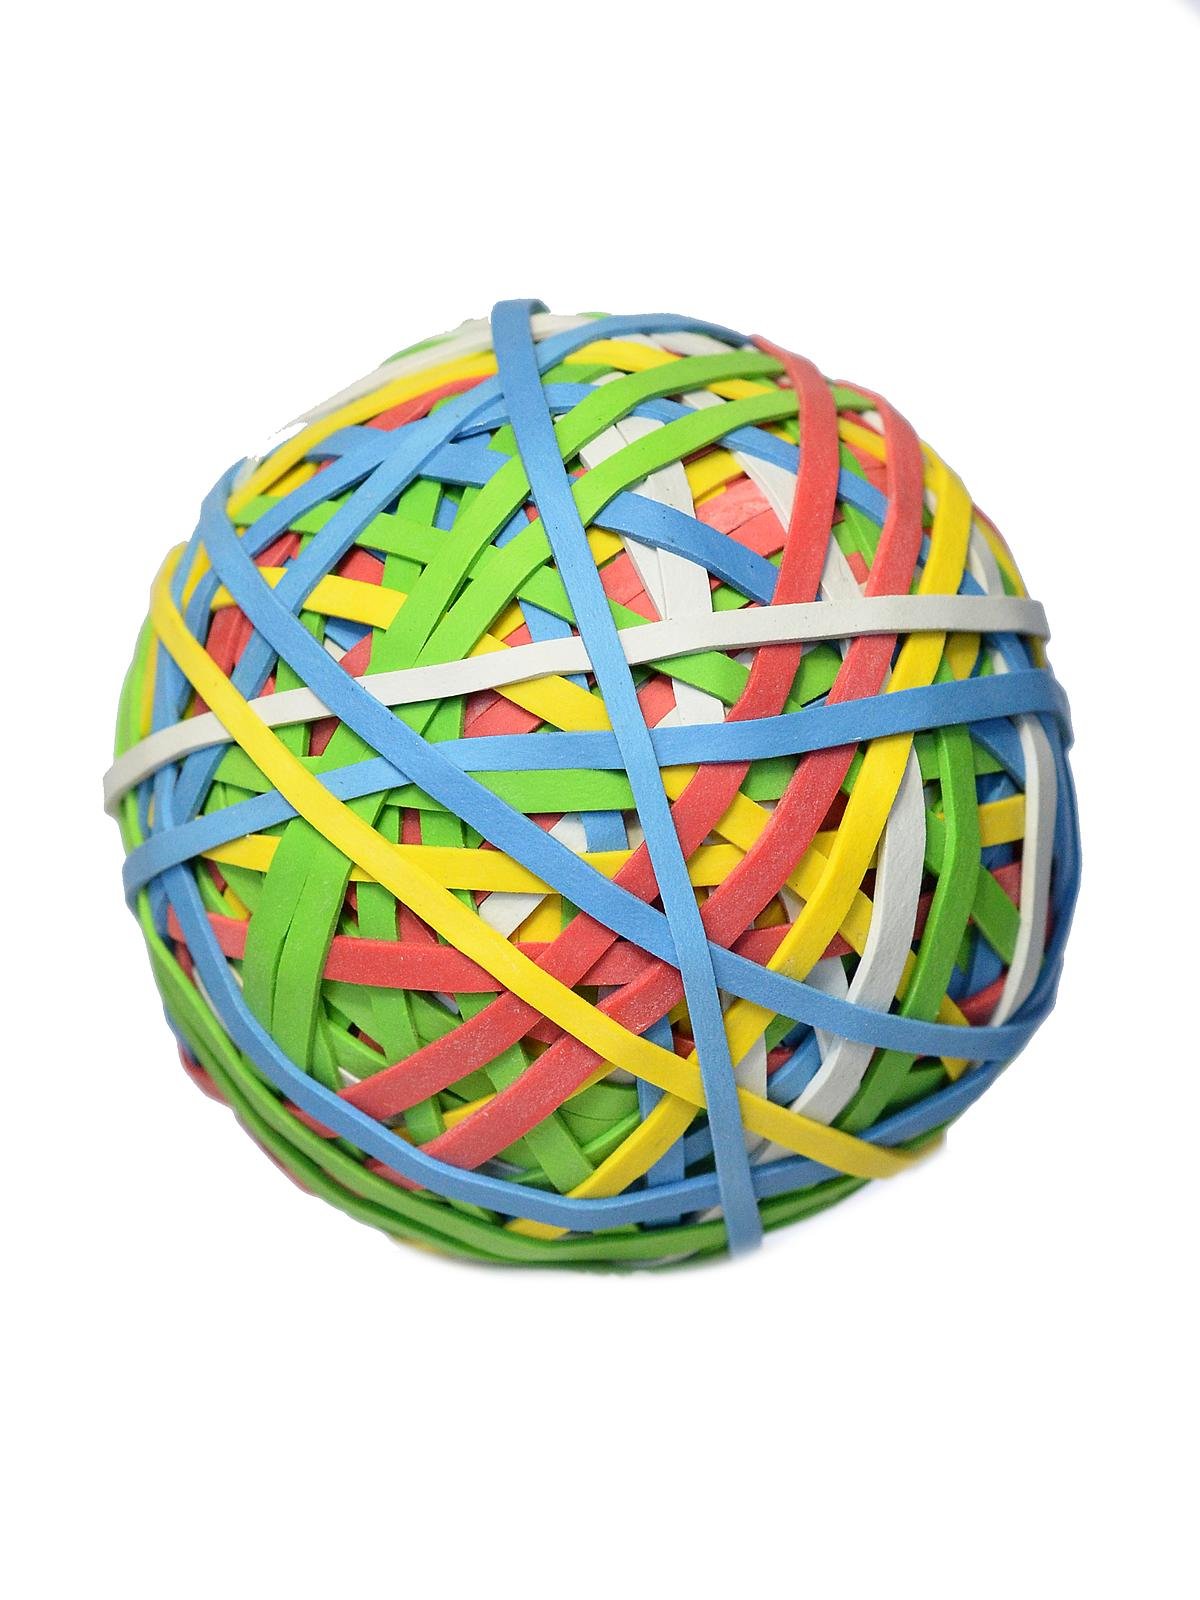 ACCO - Colored Rubber Band Ball